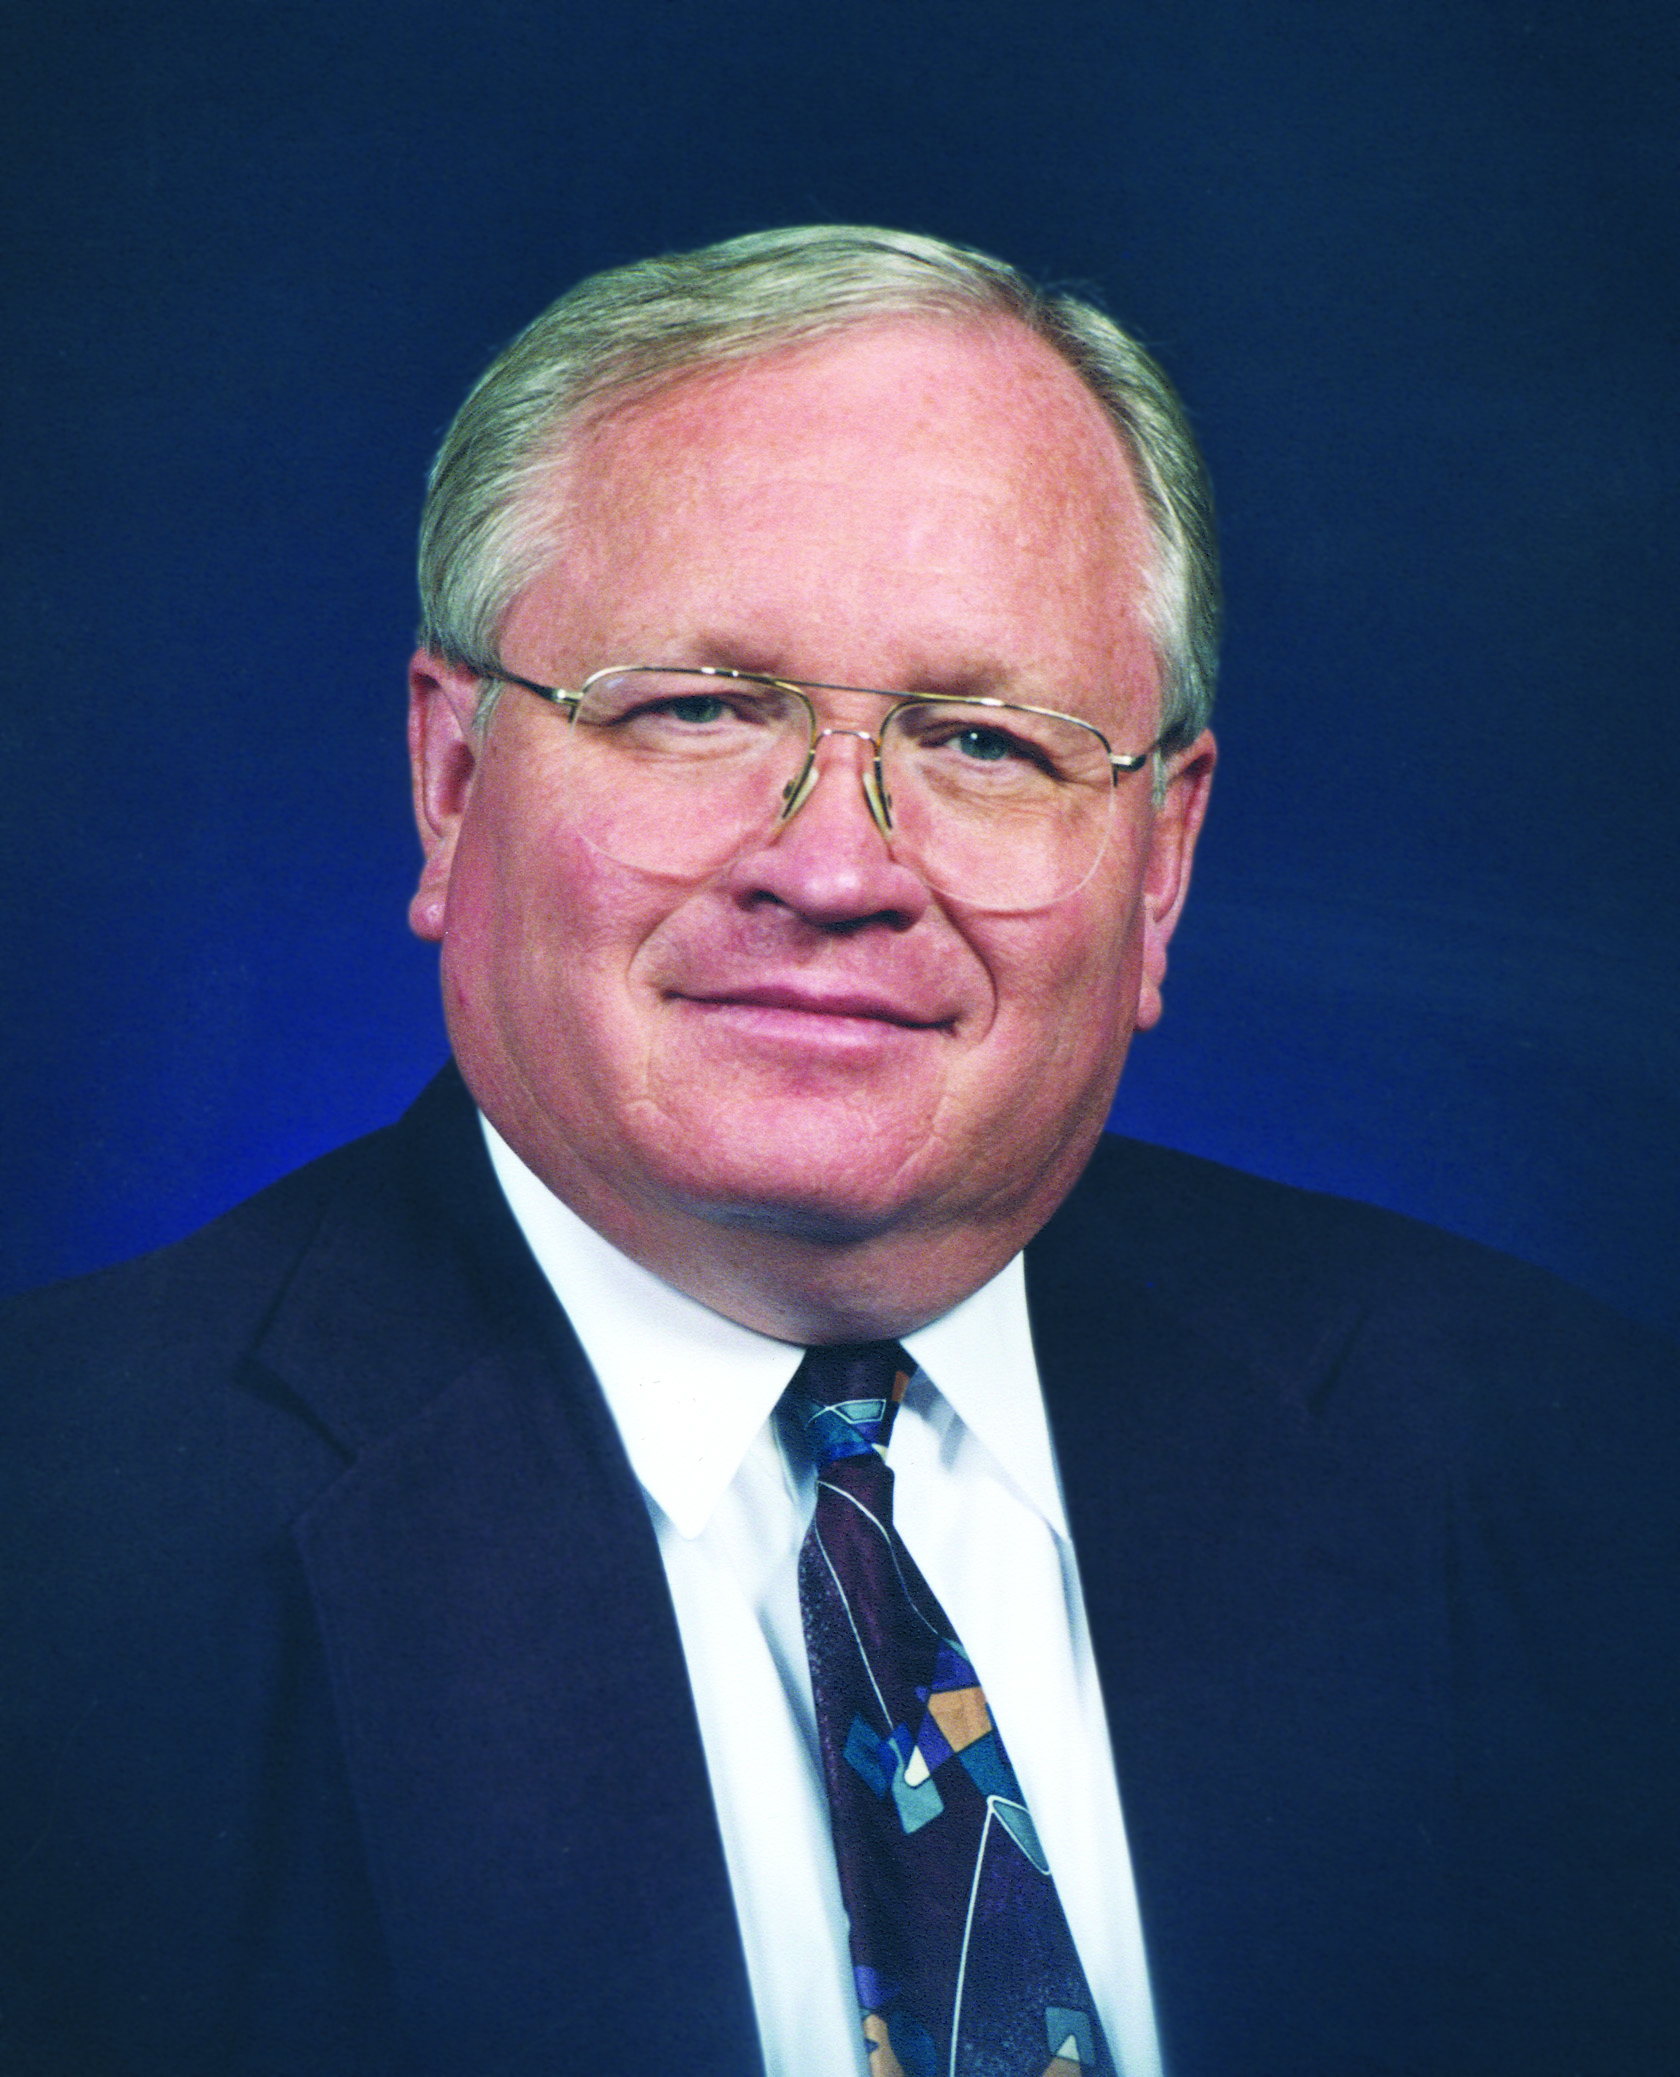 Larry Pitcher, former Christian Record Services president